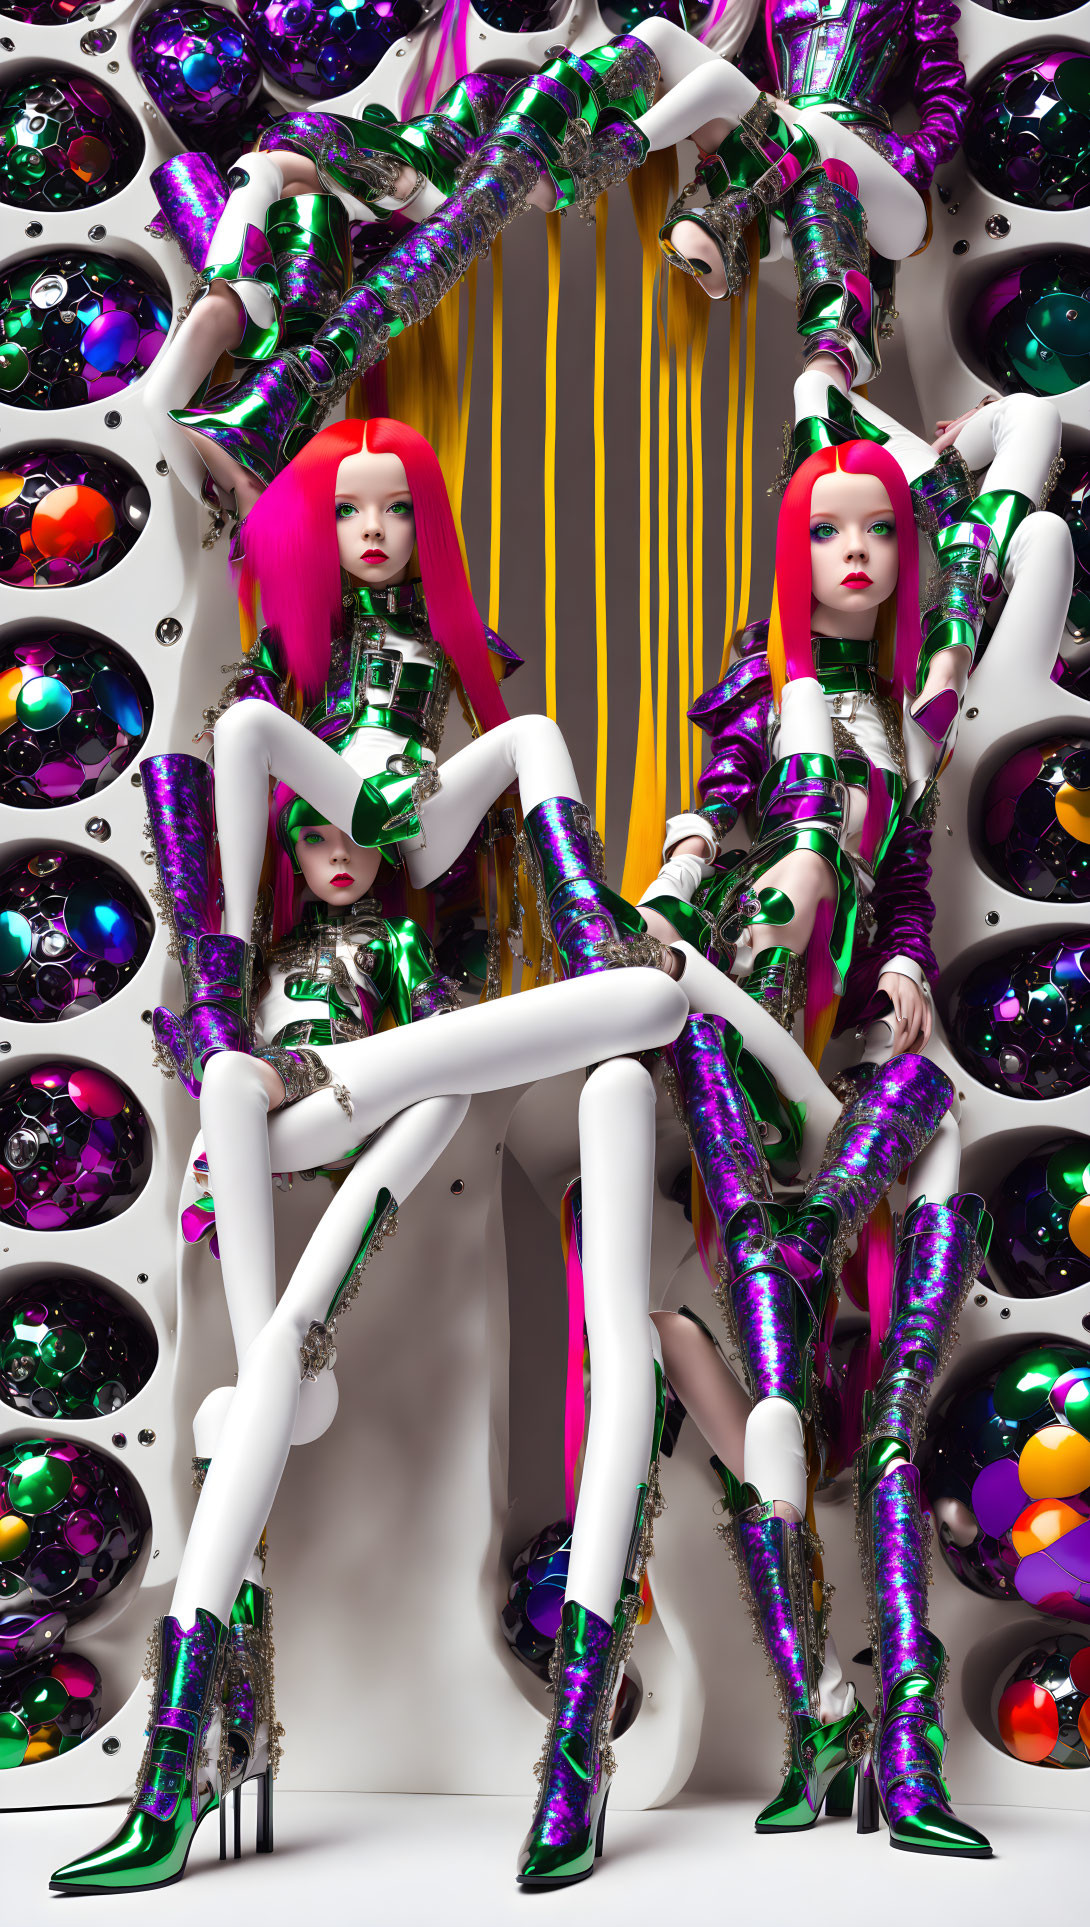 Two Female Figures in Bright Pink Hair and Futuristic Outfits with Spherical Colorful Objects